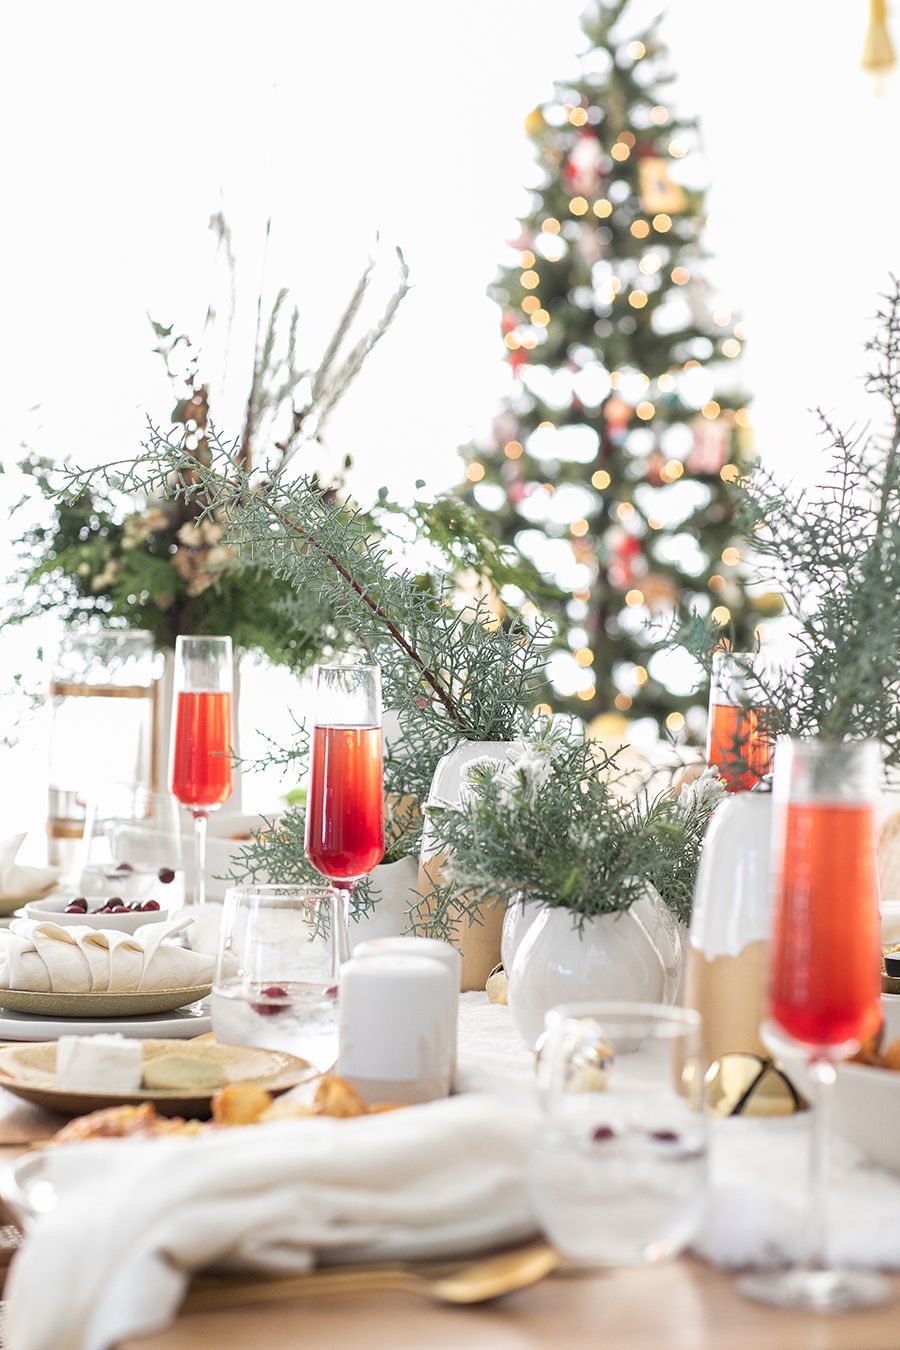 18 Best Christmas Table Settings   Decorations and Centerpiece ...